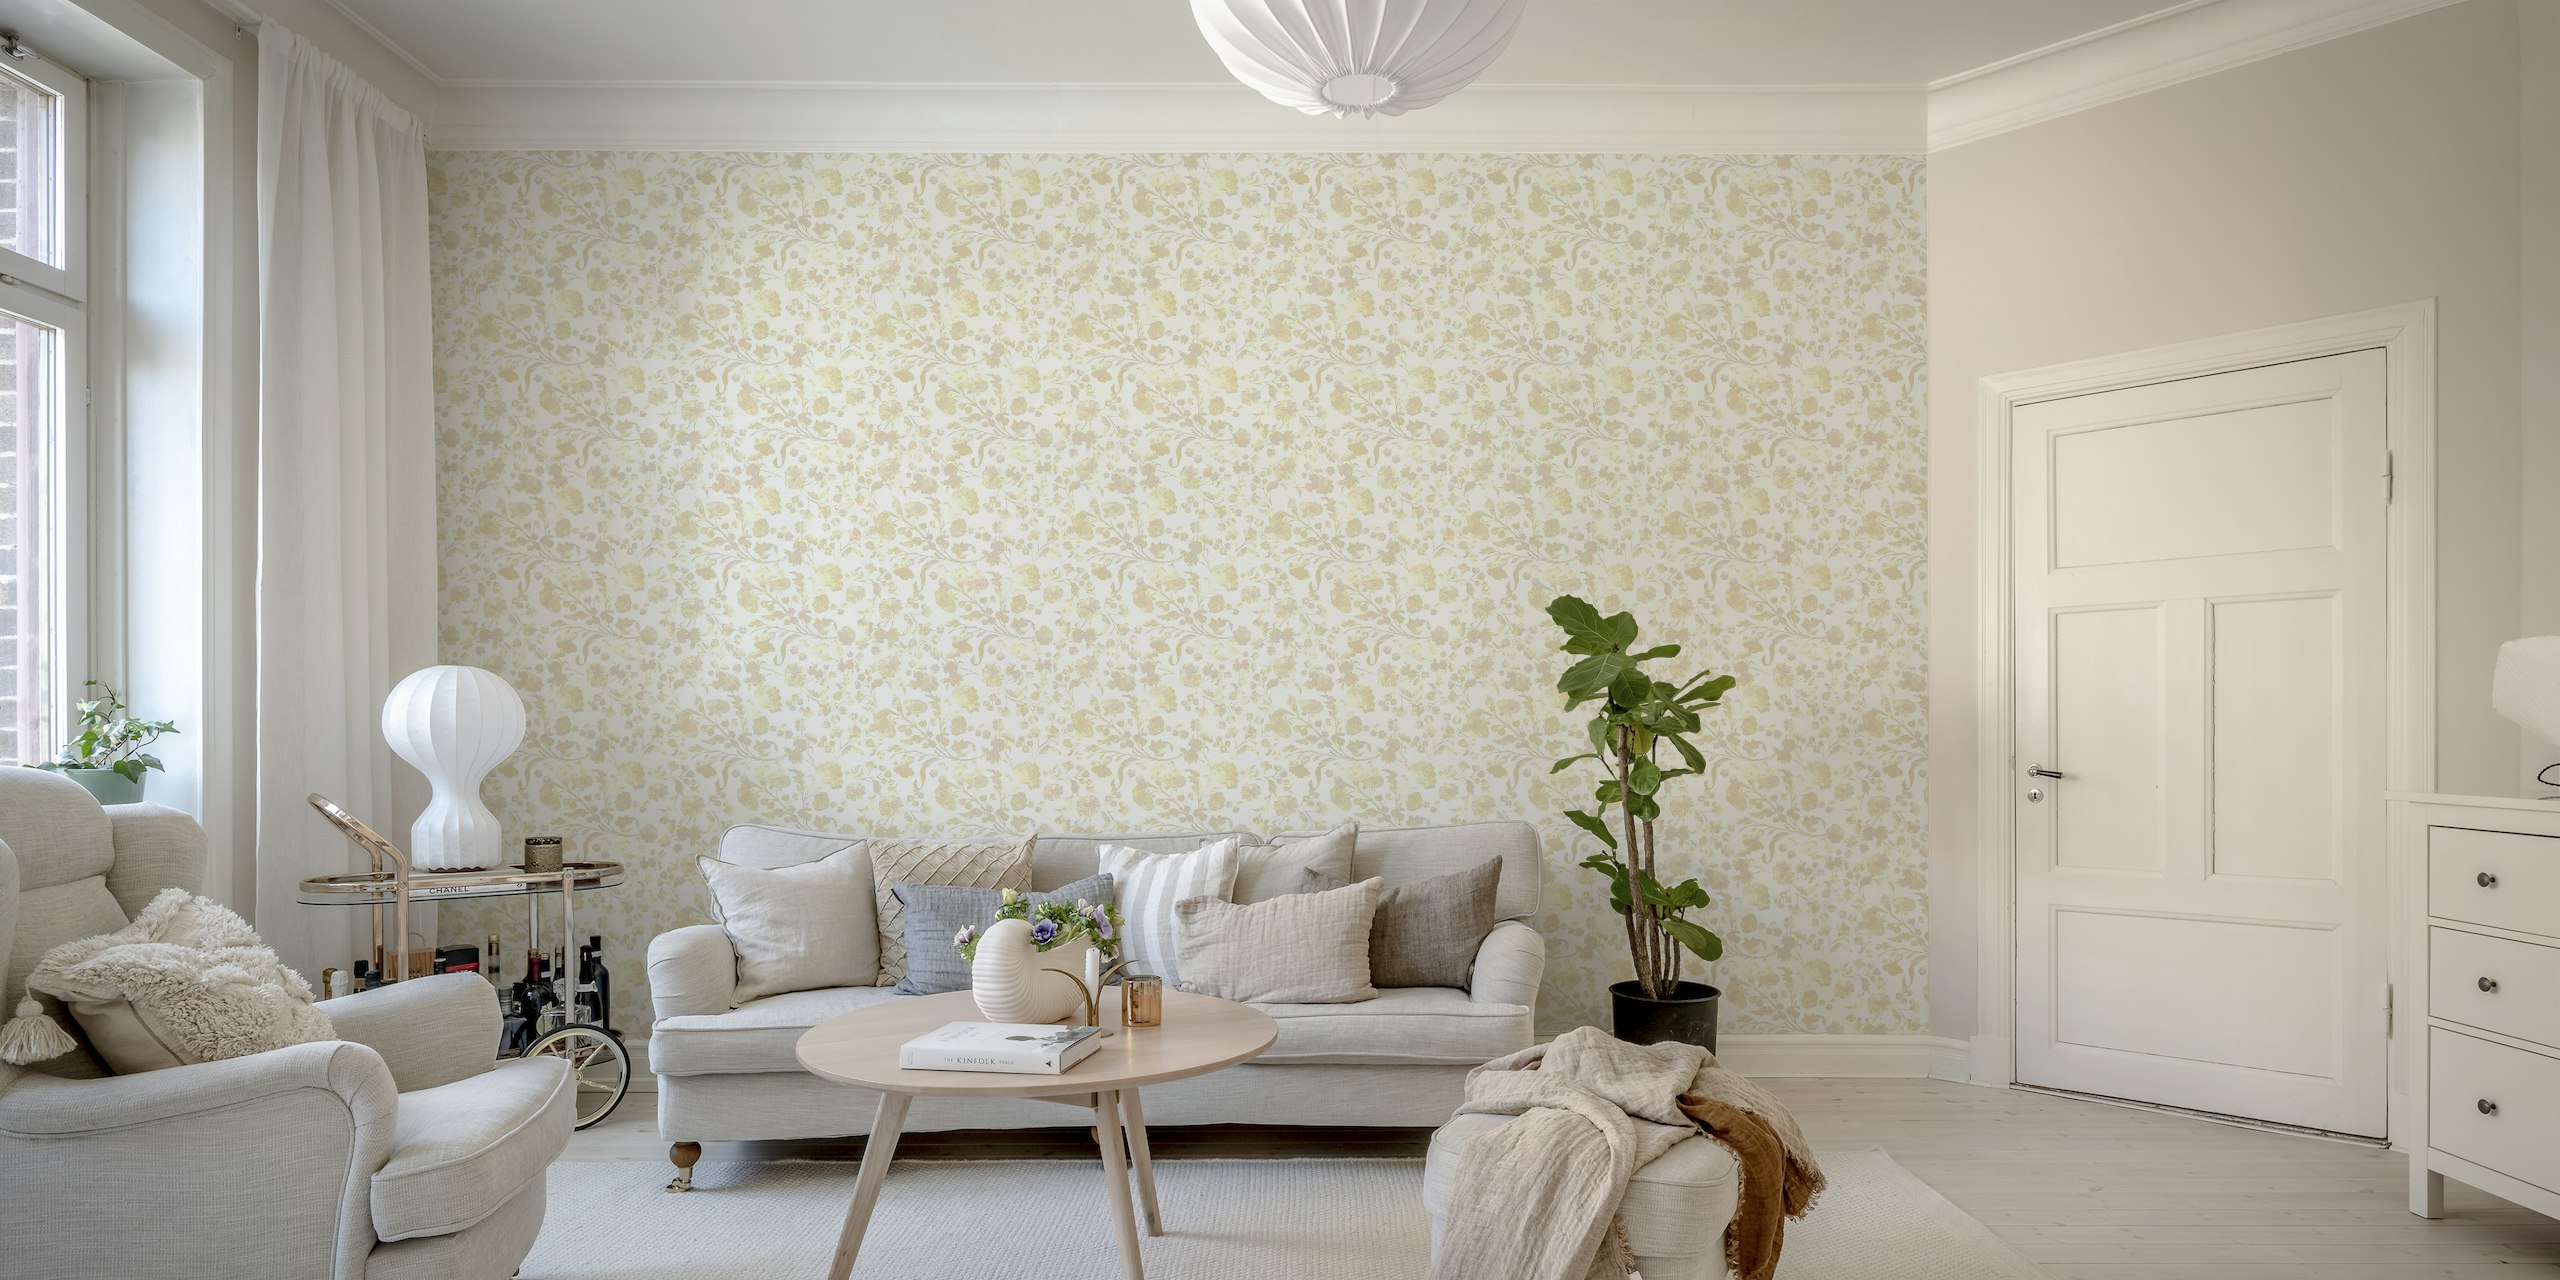 Textured sunny yellow floral wallpaper